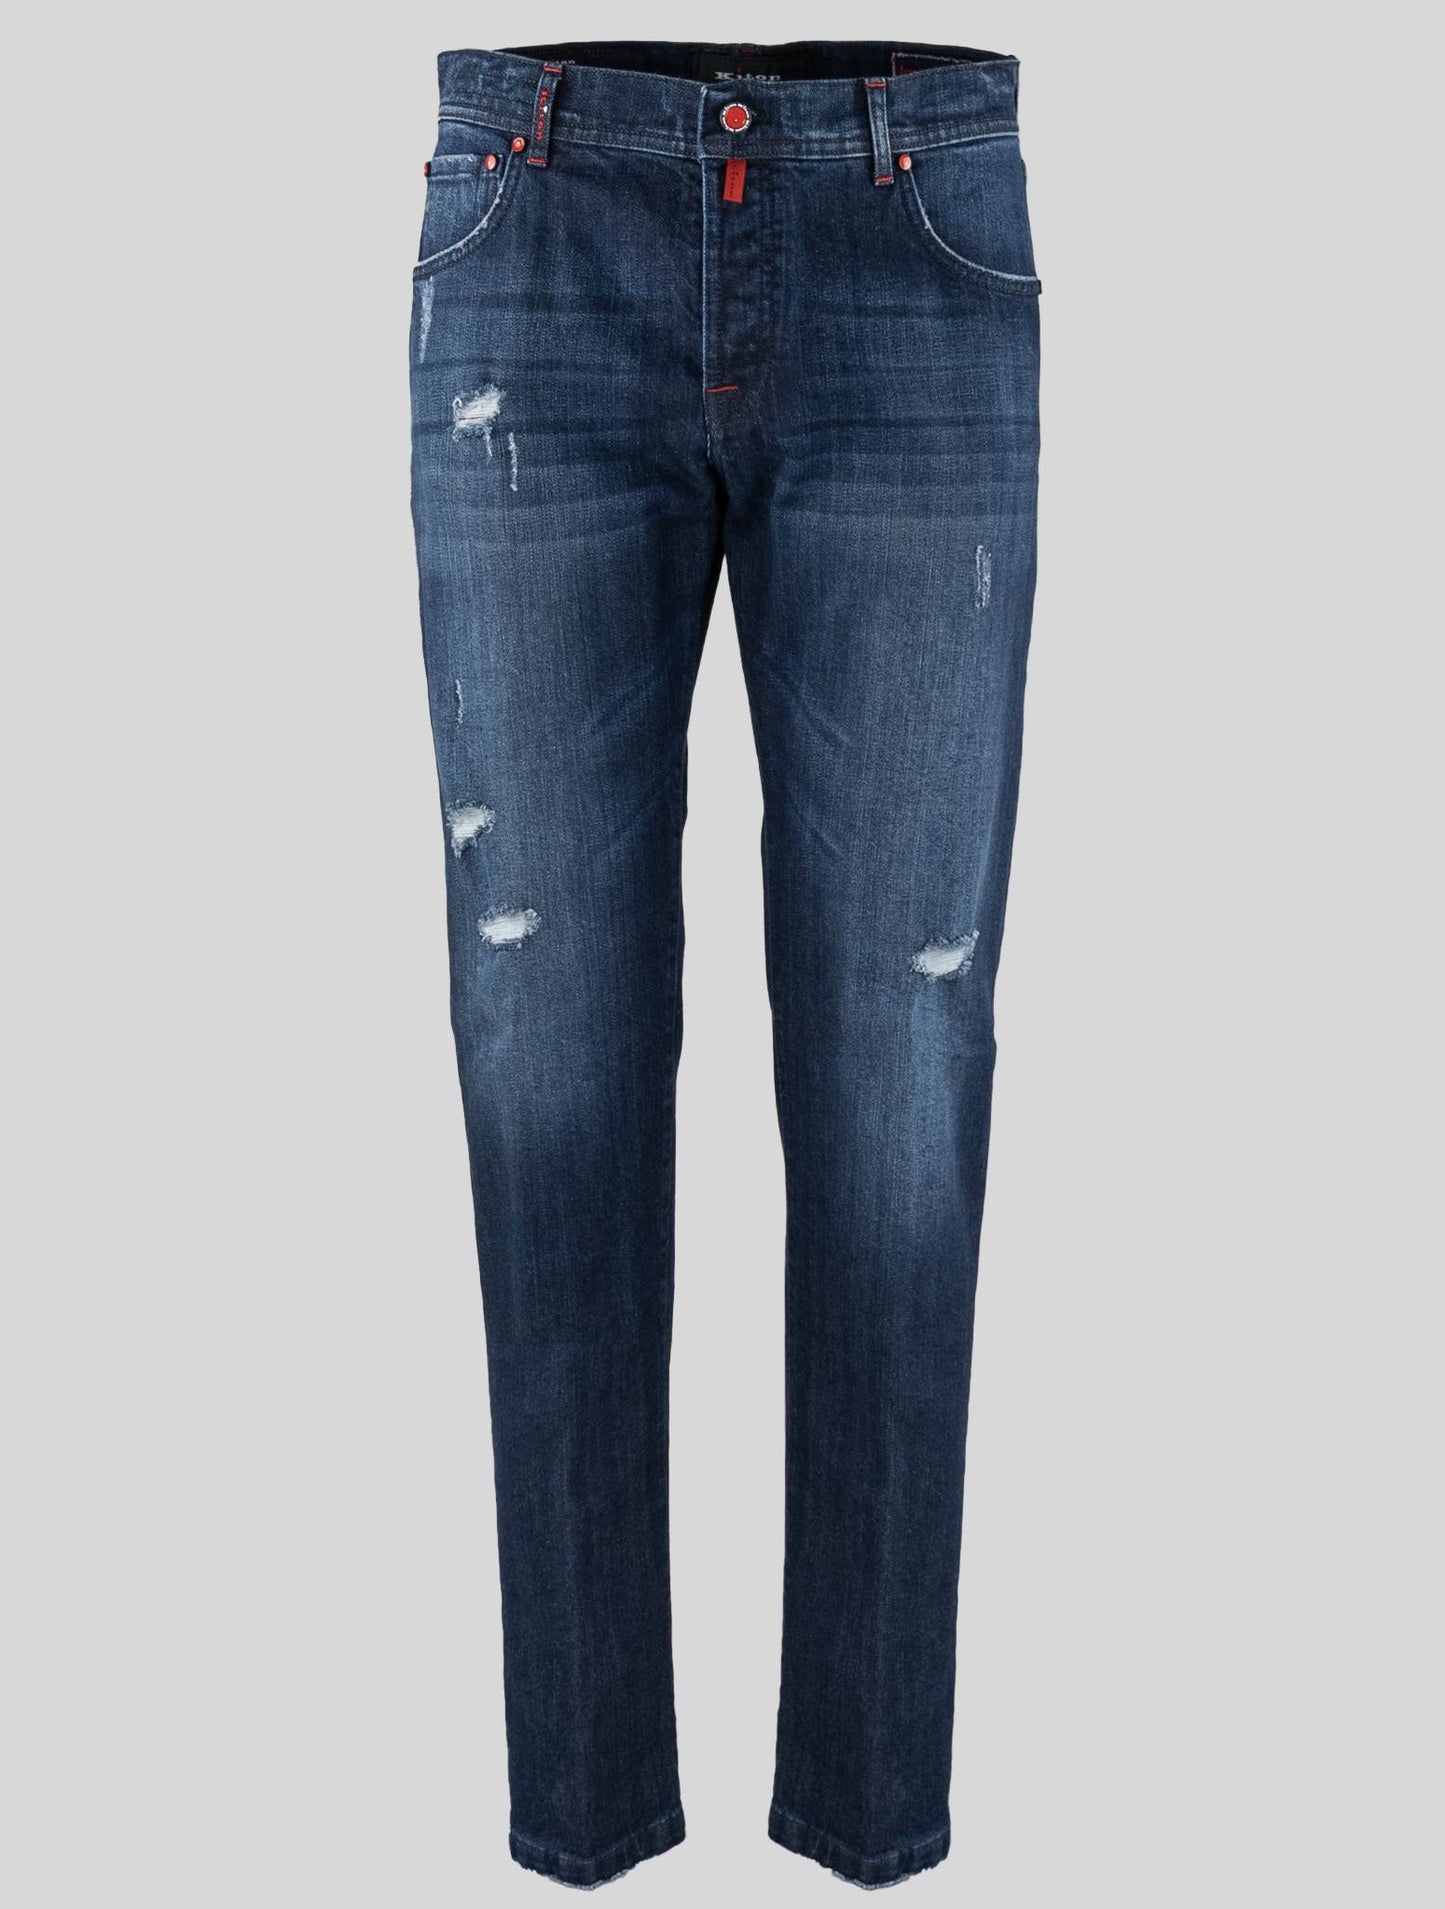 Kiton Blue Cotton Ea Jeans Limited Edition 08 of 22